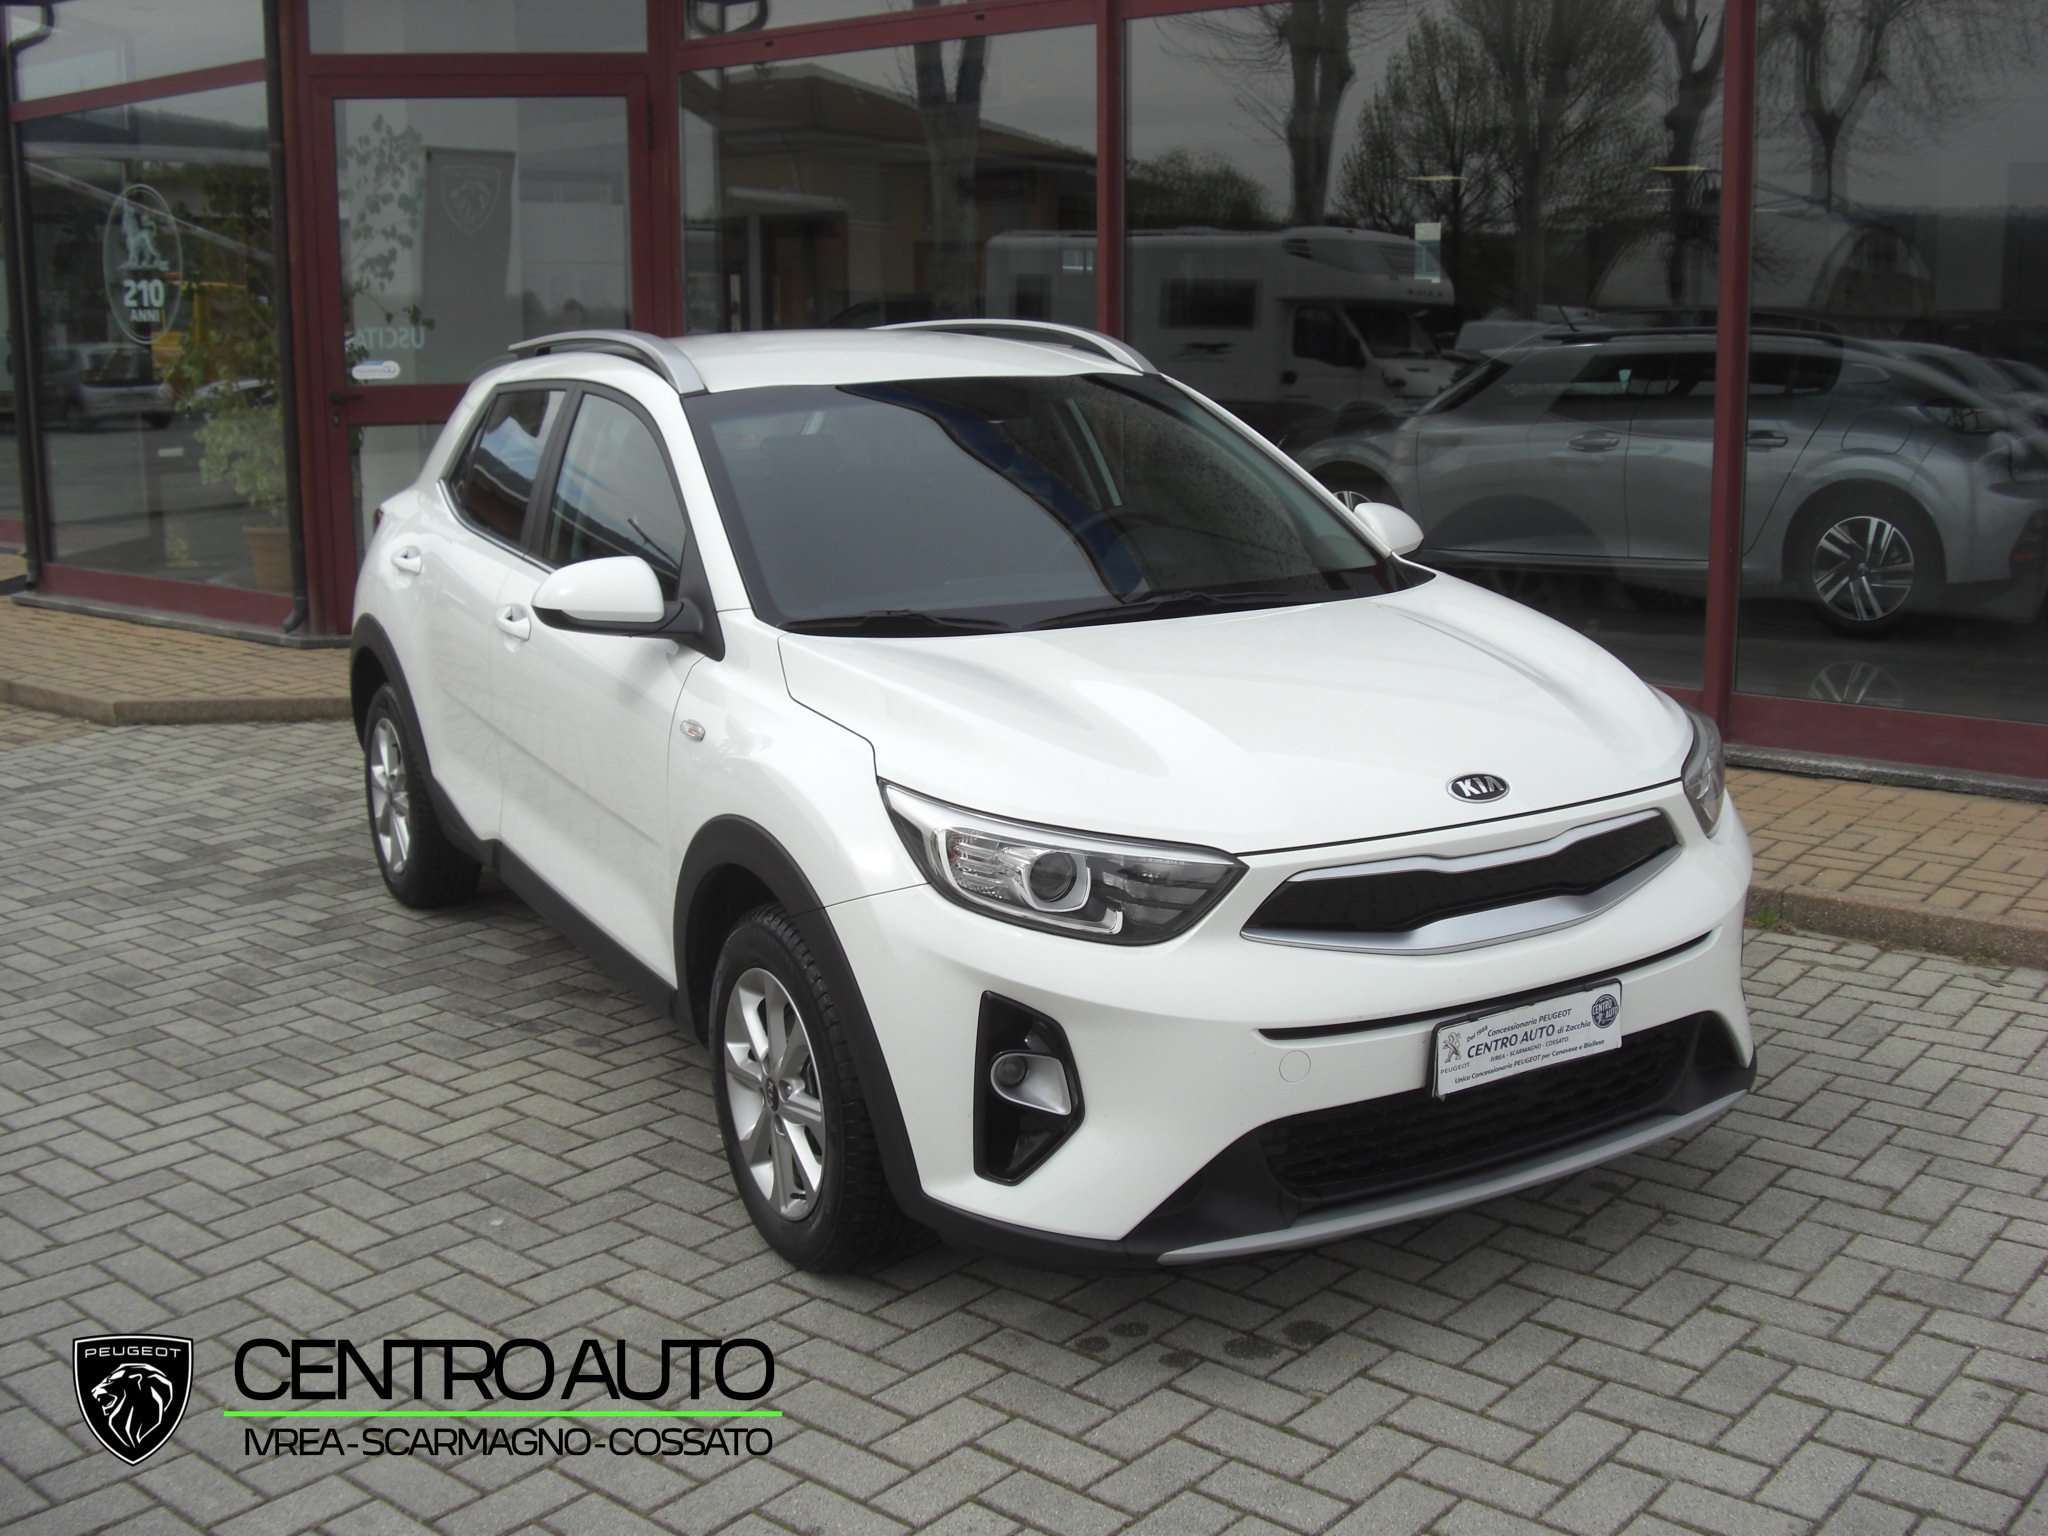 Kia Stonic Off-Road/Pick-up in White used in Ivrea - Torino - To for € 15,600.-